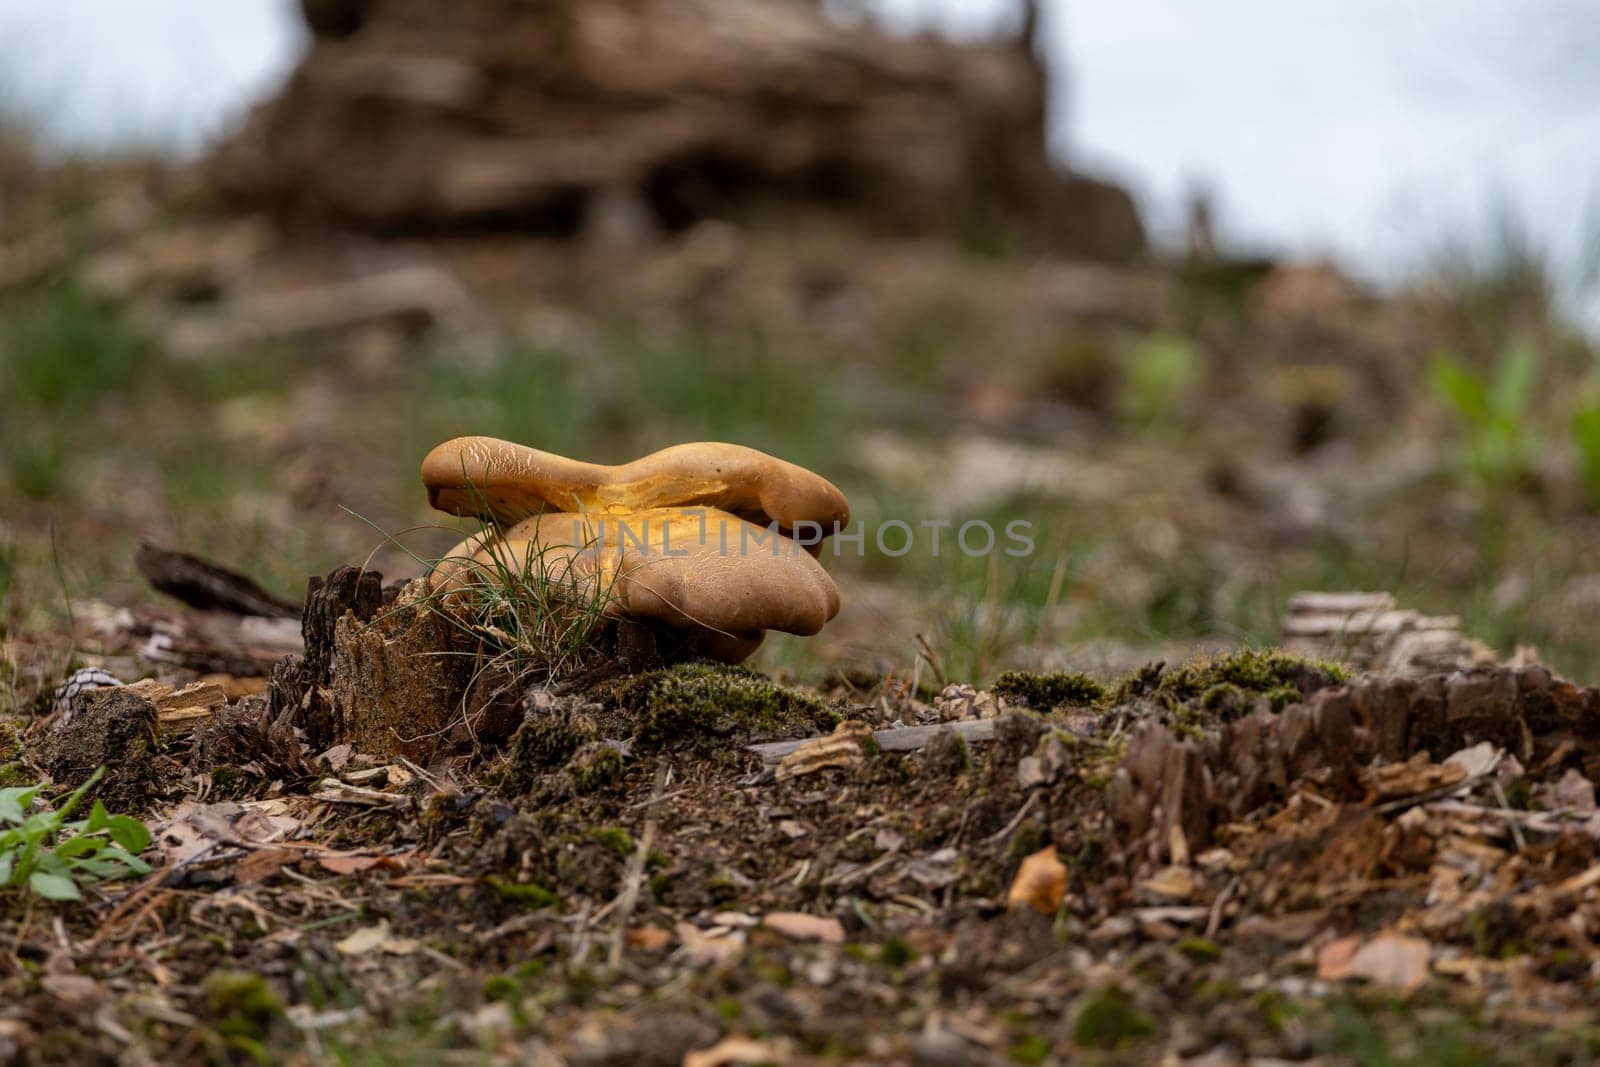 A small Pig mushroom growing out of a tree stump in a peaceful outdoor setting